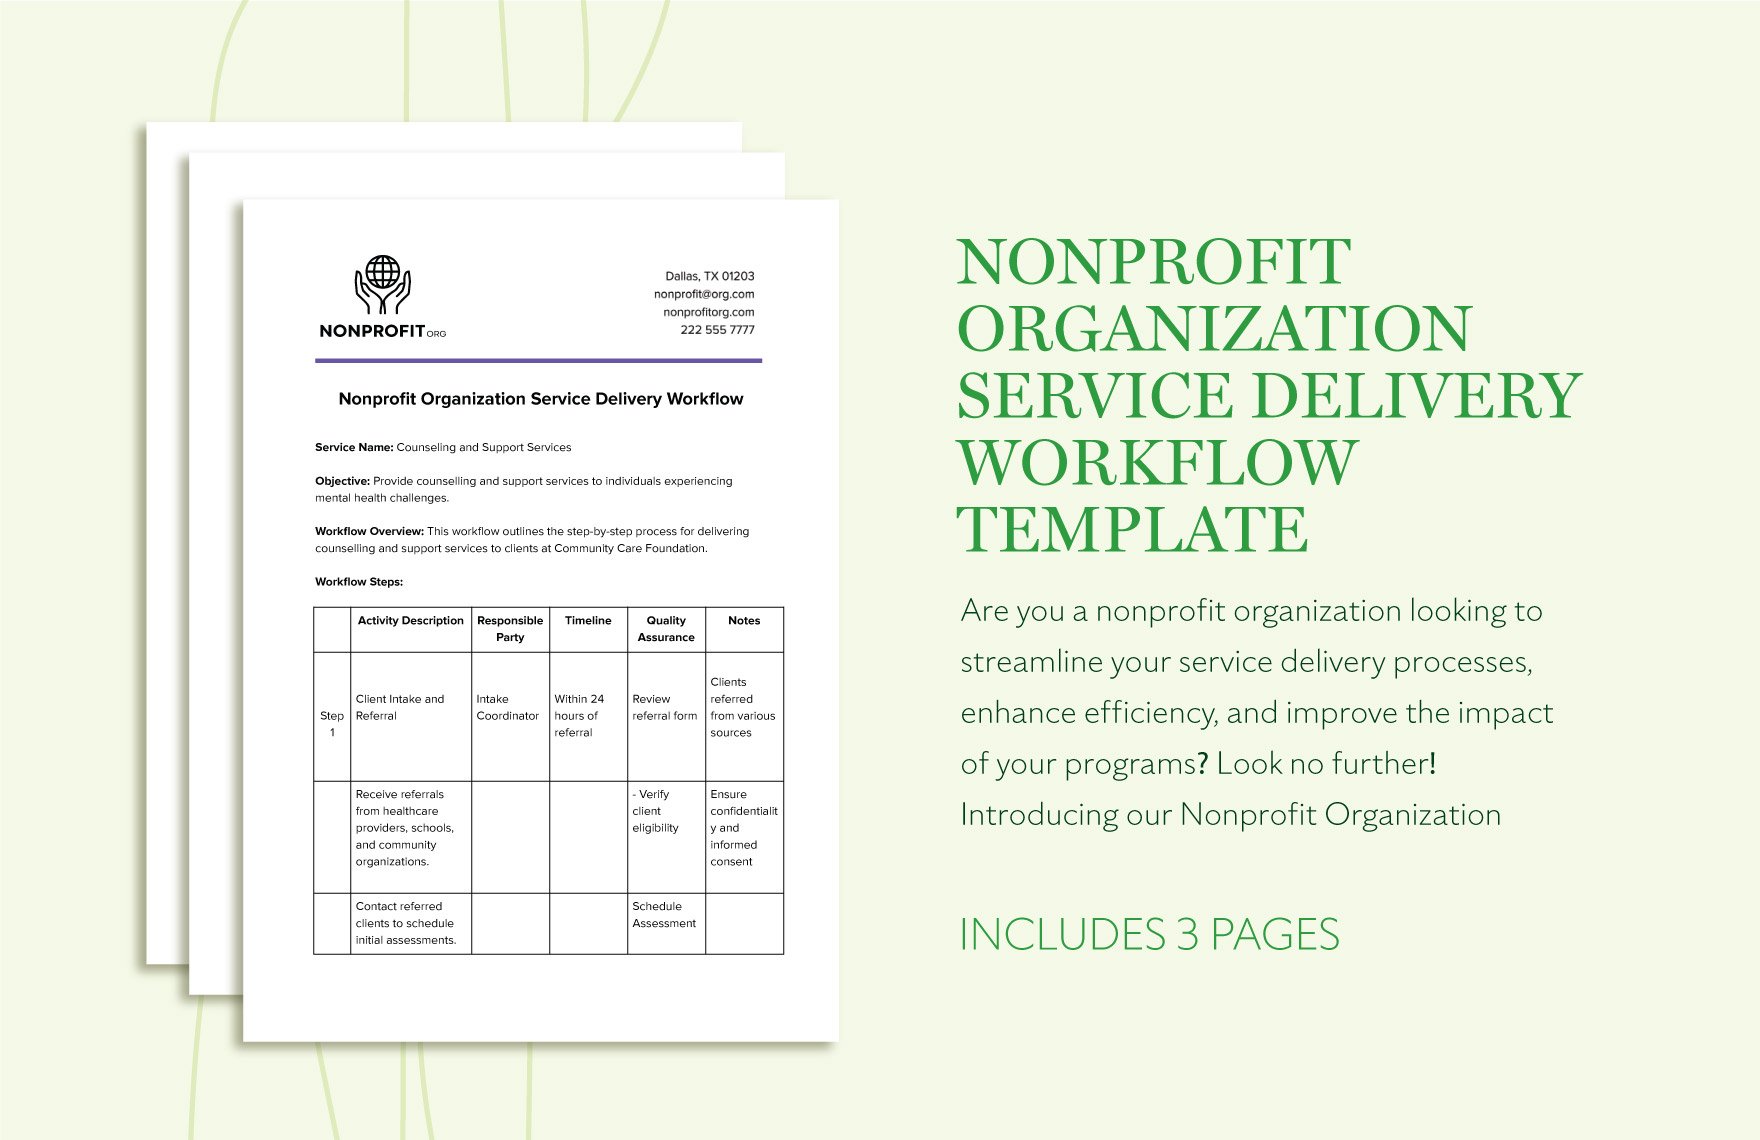 Nonprofit Organization Service Delivery Workflow Template in Word, Google Docs, PDF